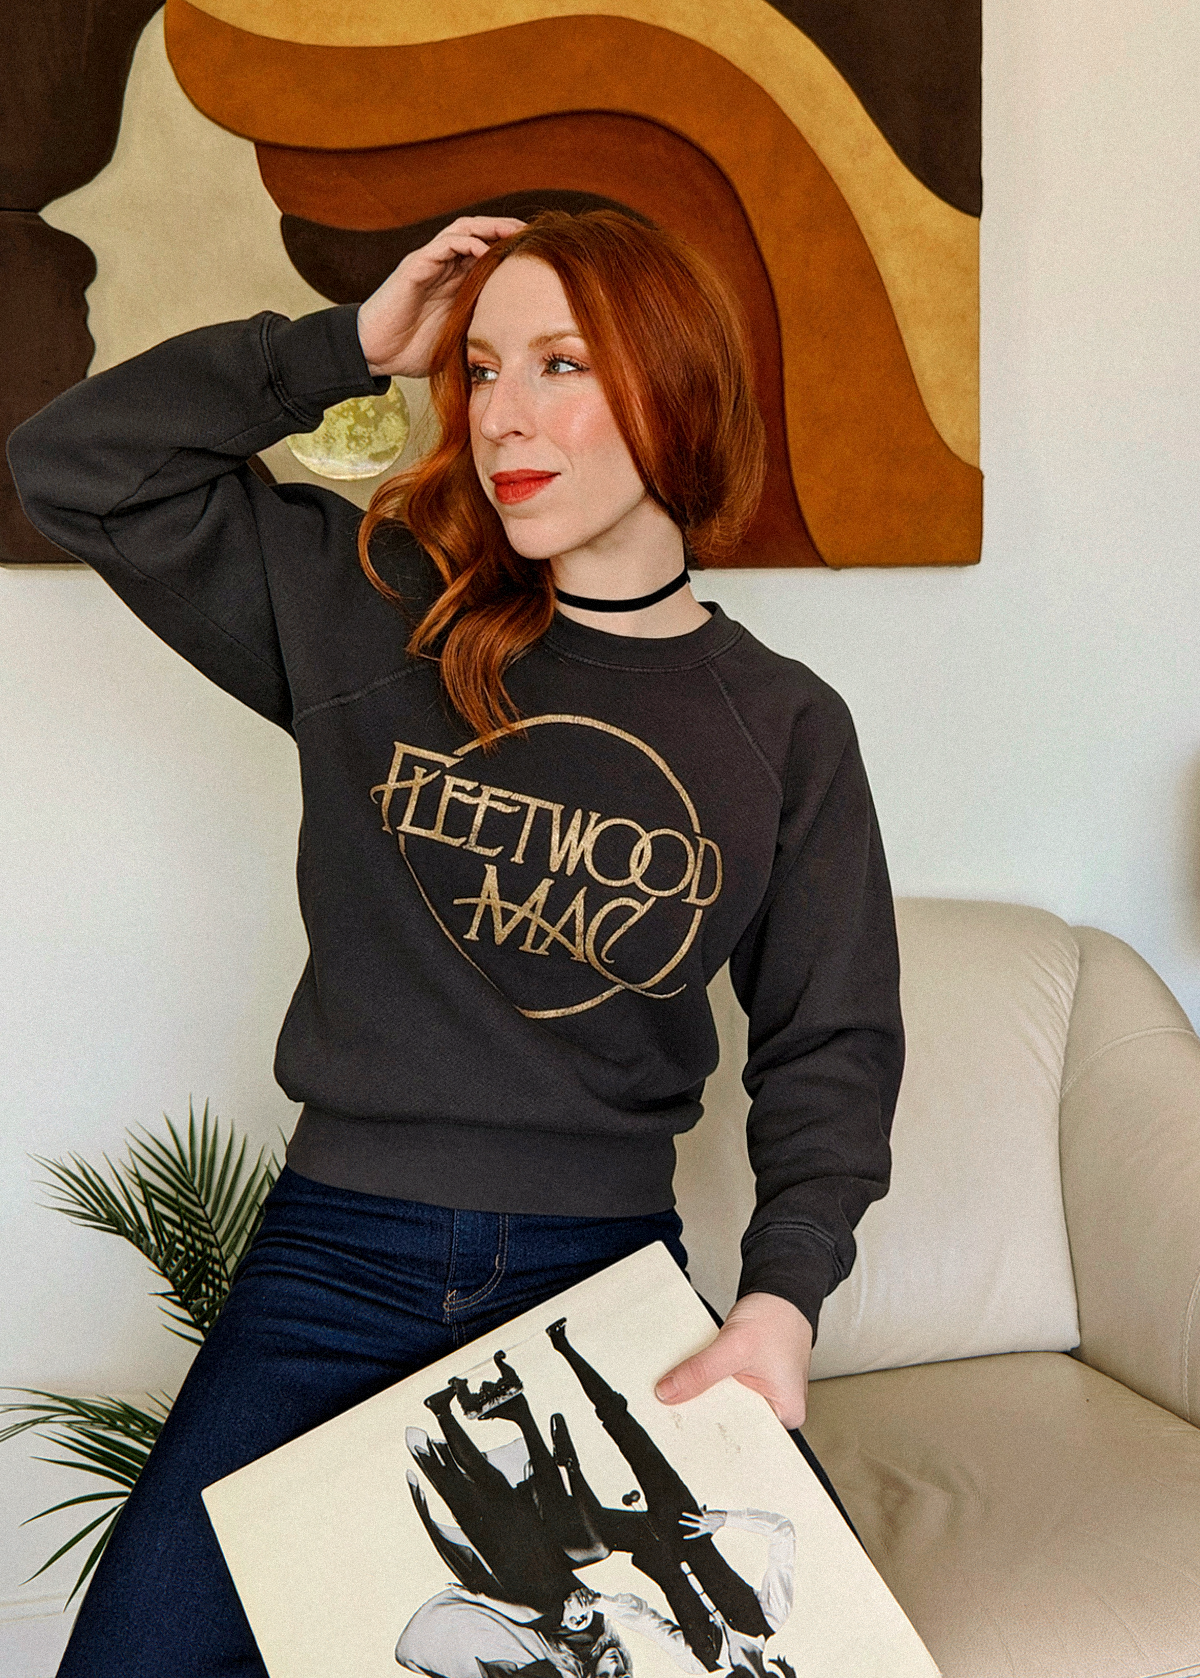 Washed Black Fleetwood Mac raglan crew neck sweatshirt with gold graphics at front, by Daydreamer LA, officially licensed and made in California